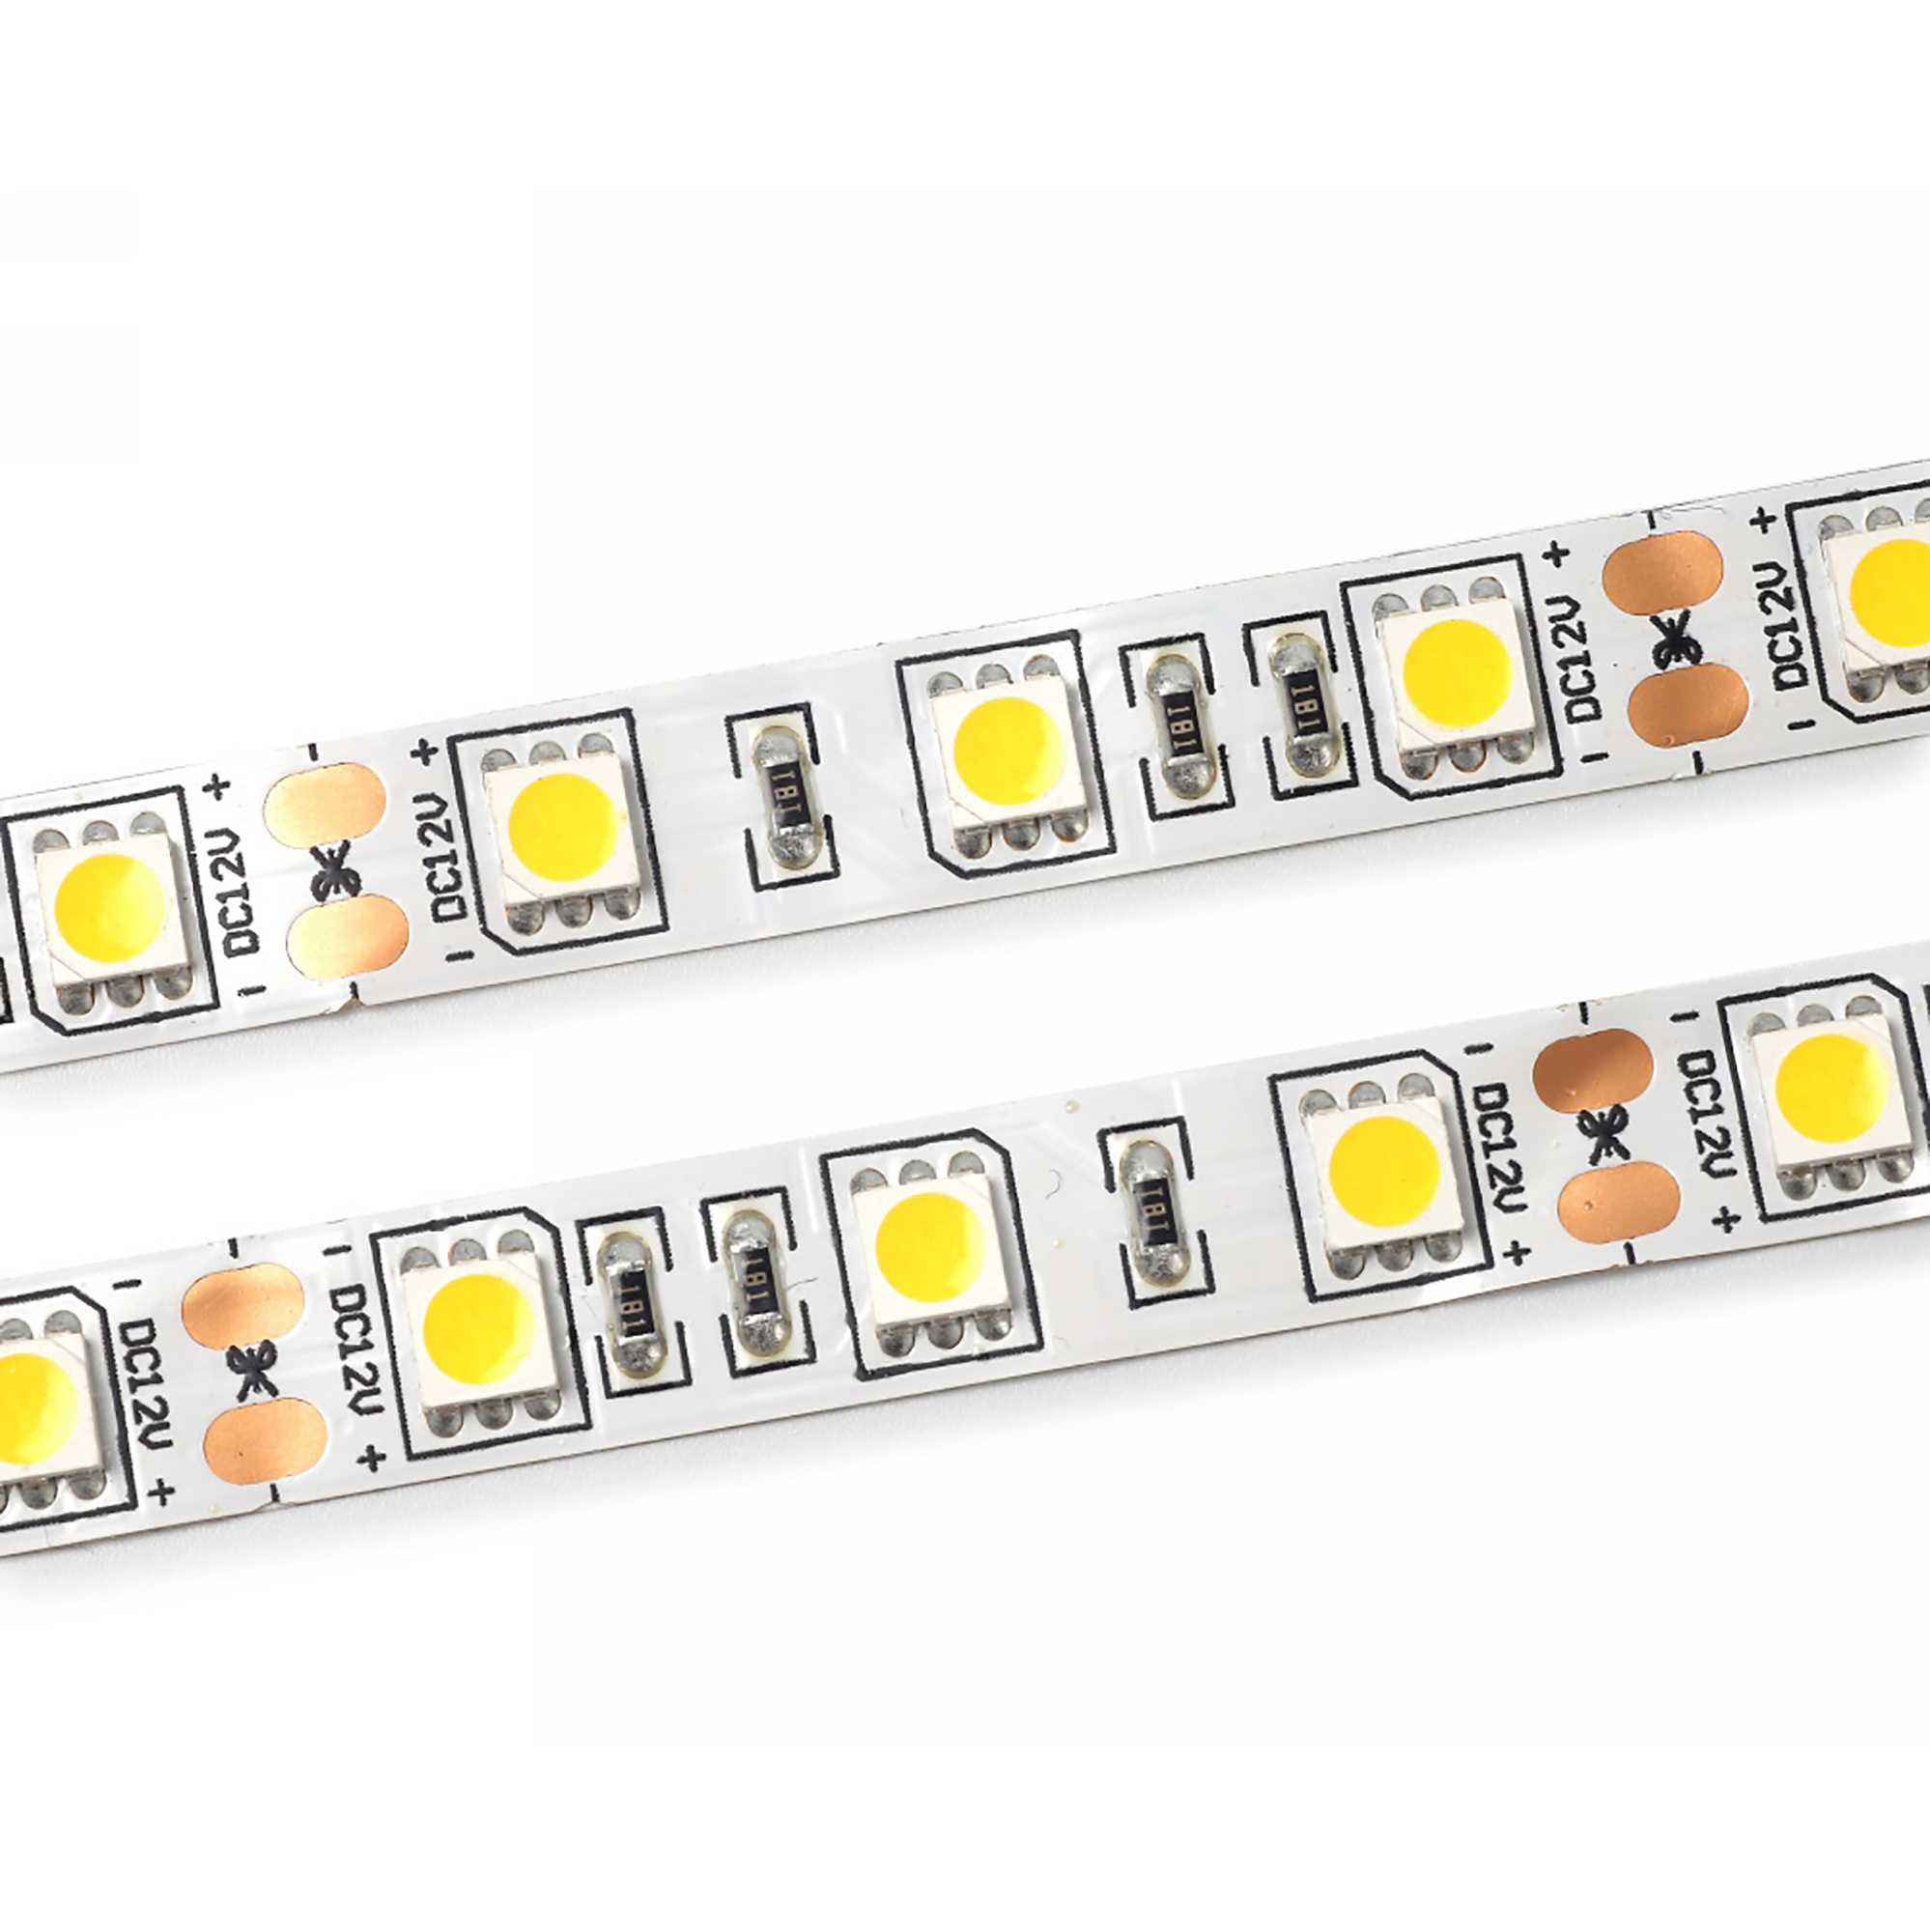 DX700036  Axios Select 5mx10mm 12V 72W LED Strip 1300lm/m 6000K IP20